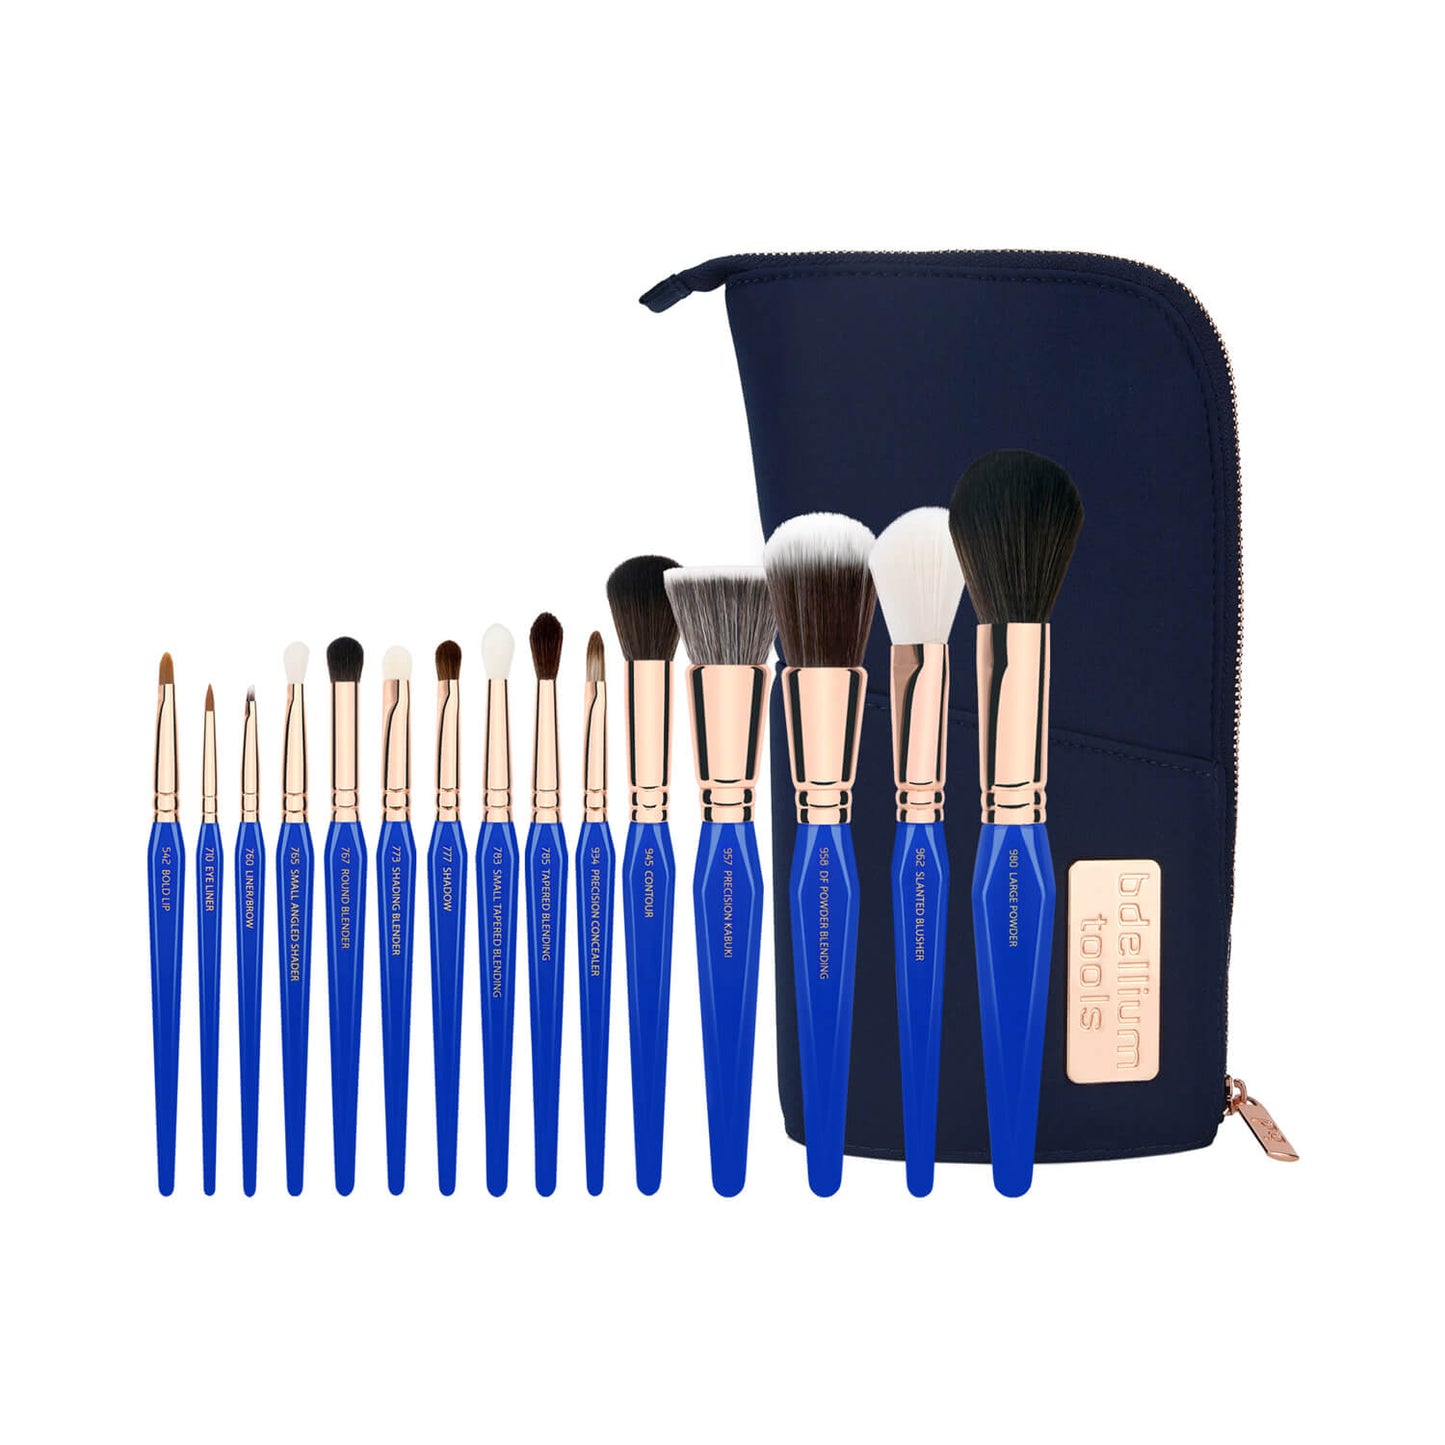 BDellium Tools Golden Triangle Phase I Complete 15pc Brush Set With Pouch